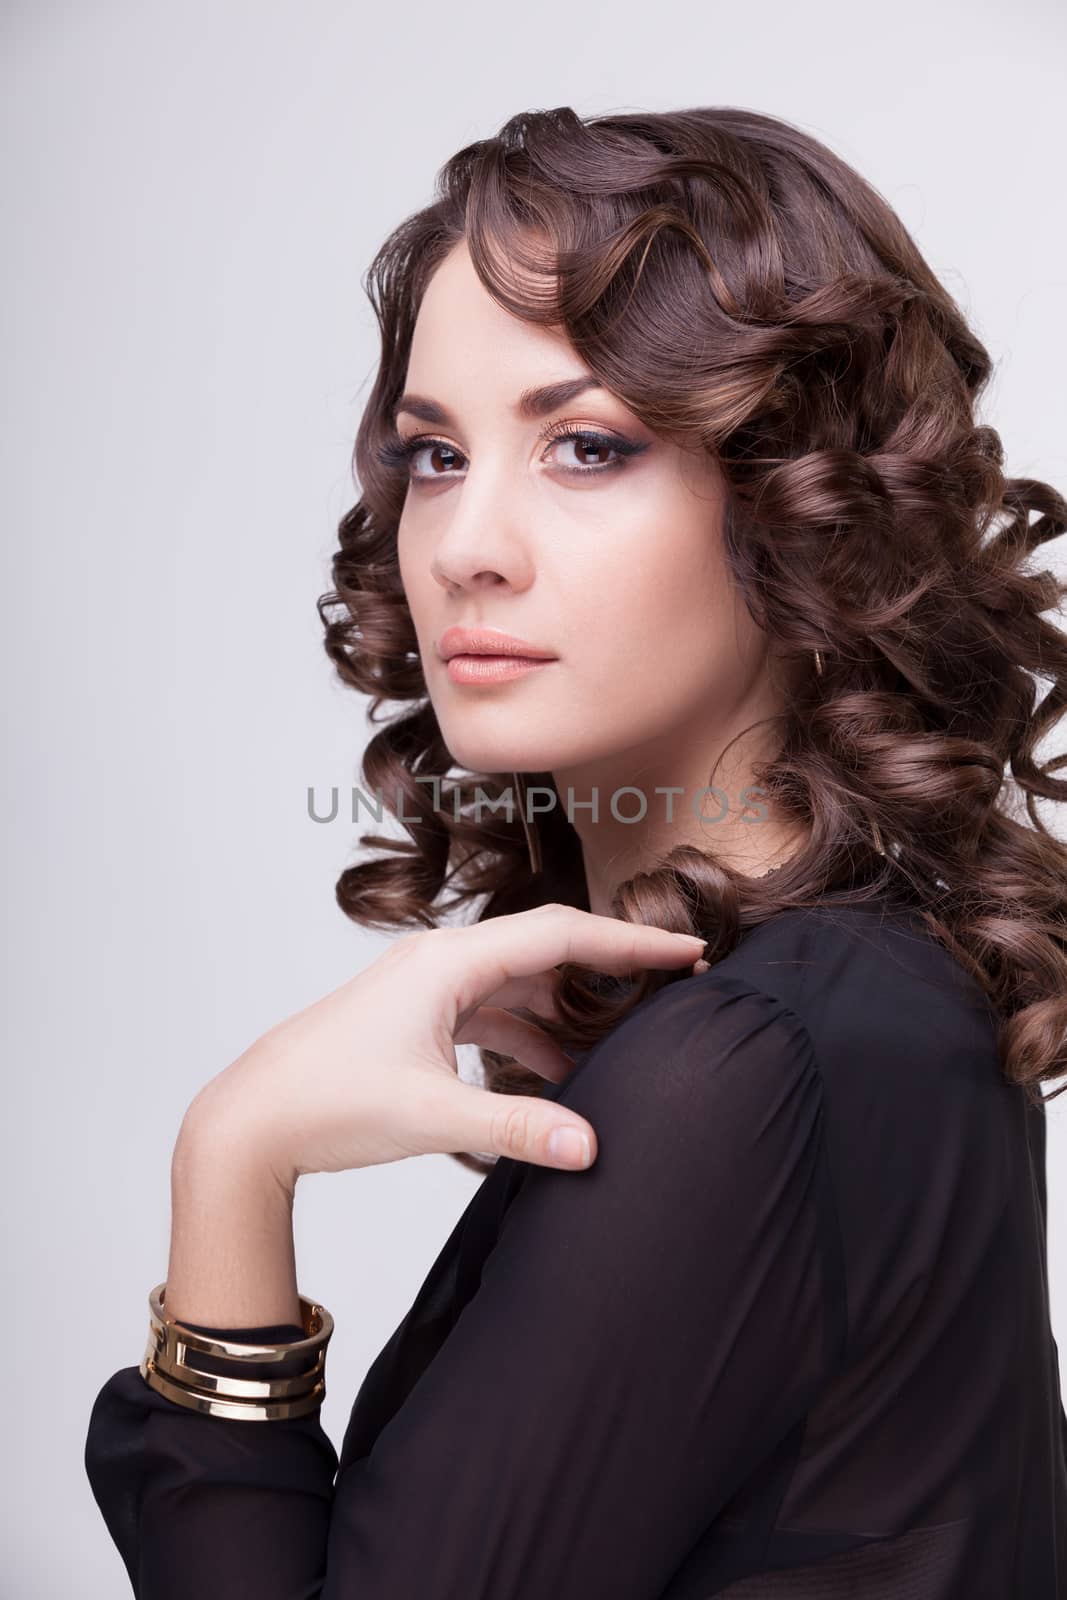 Gorgeous woman professional make up and hairstyle by DCStudio